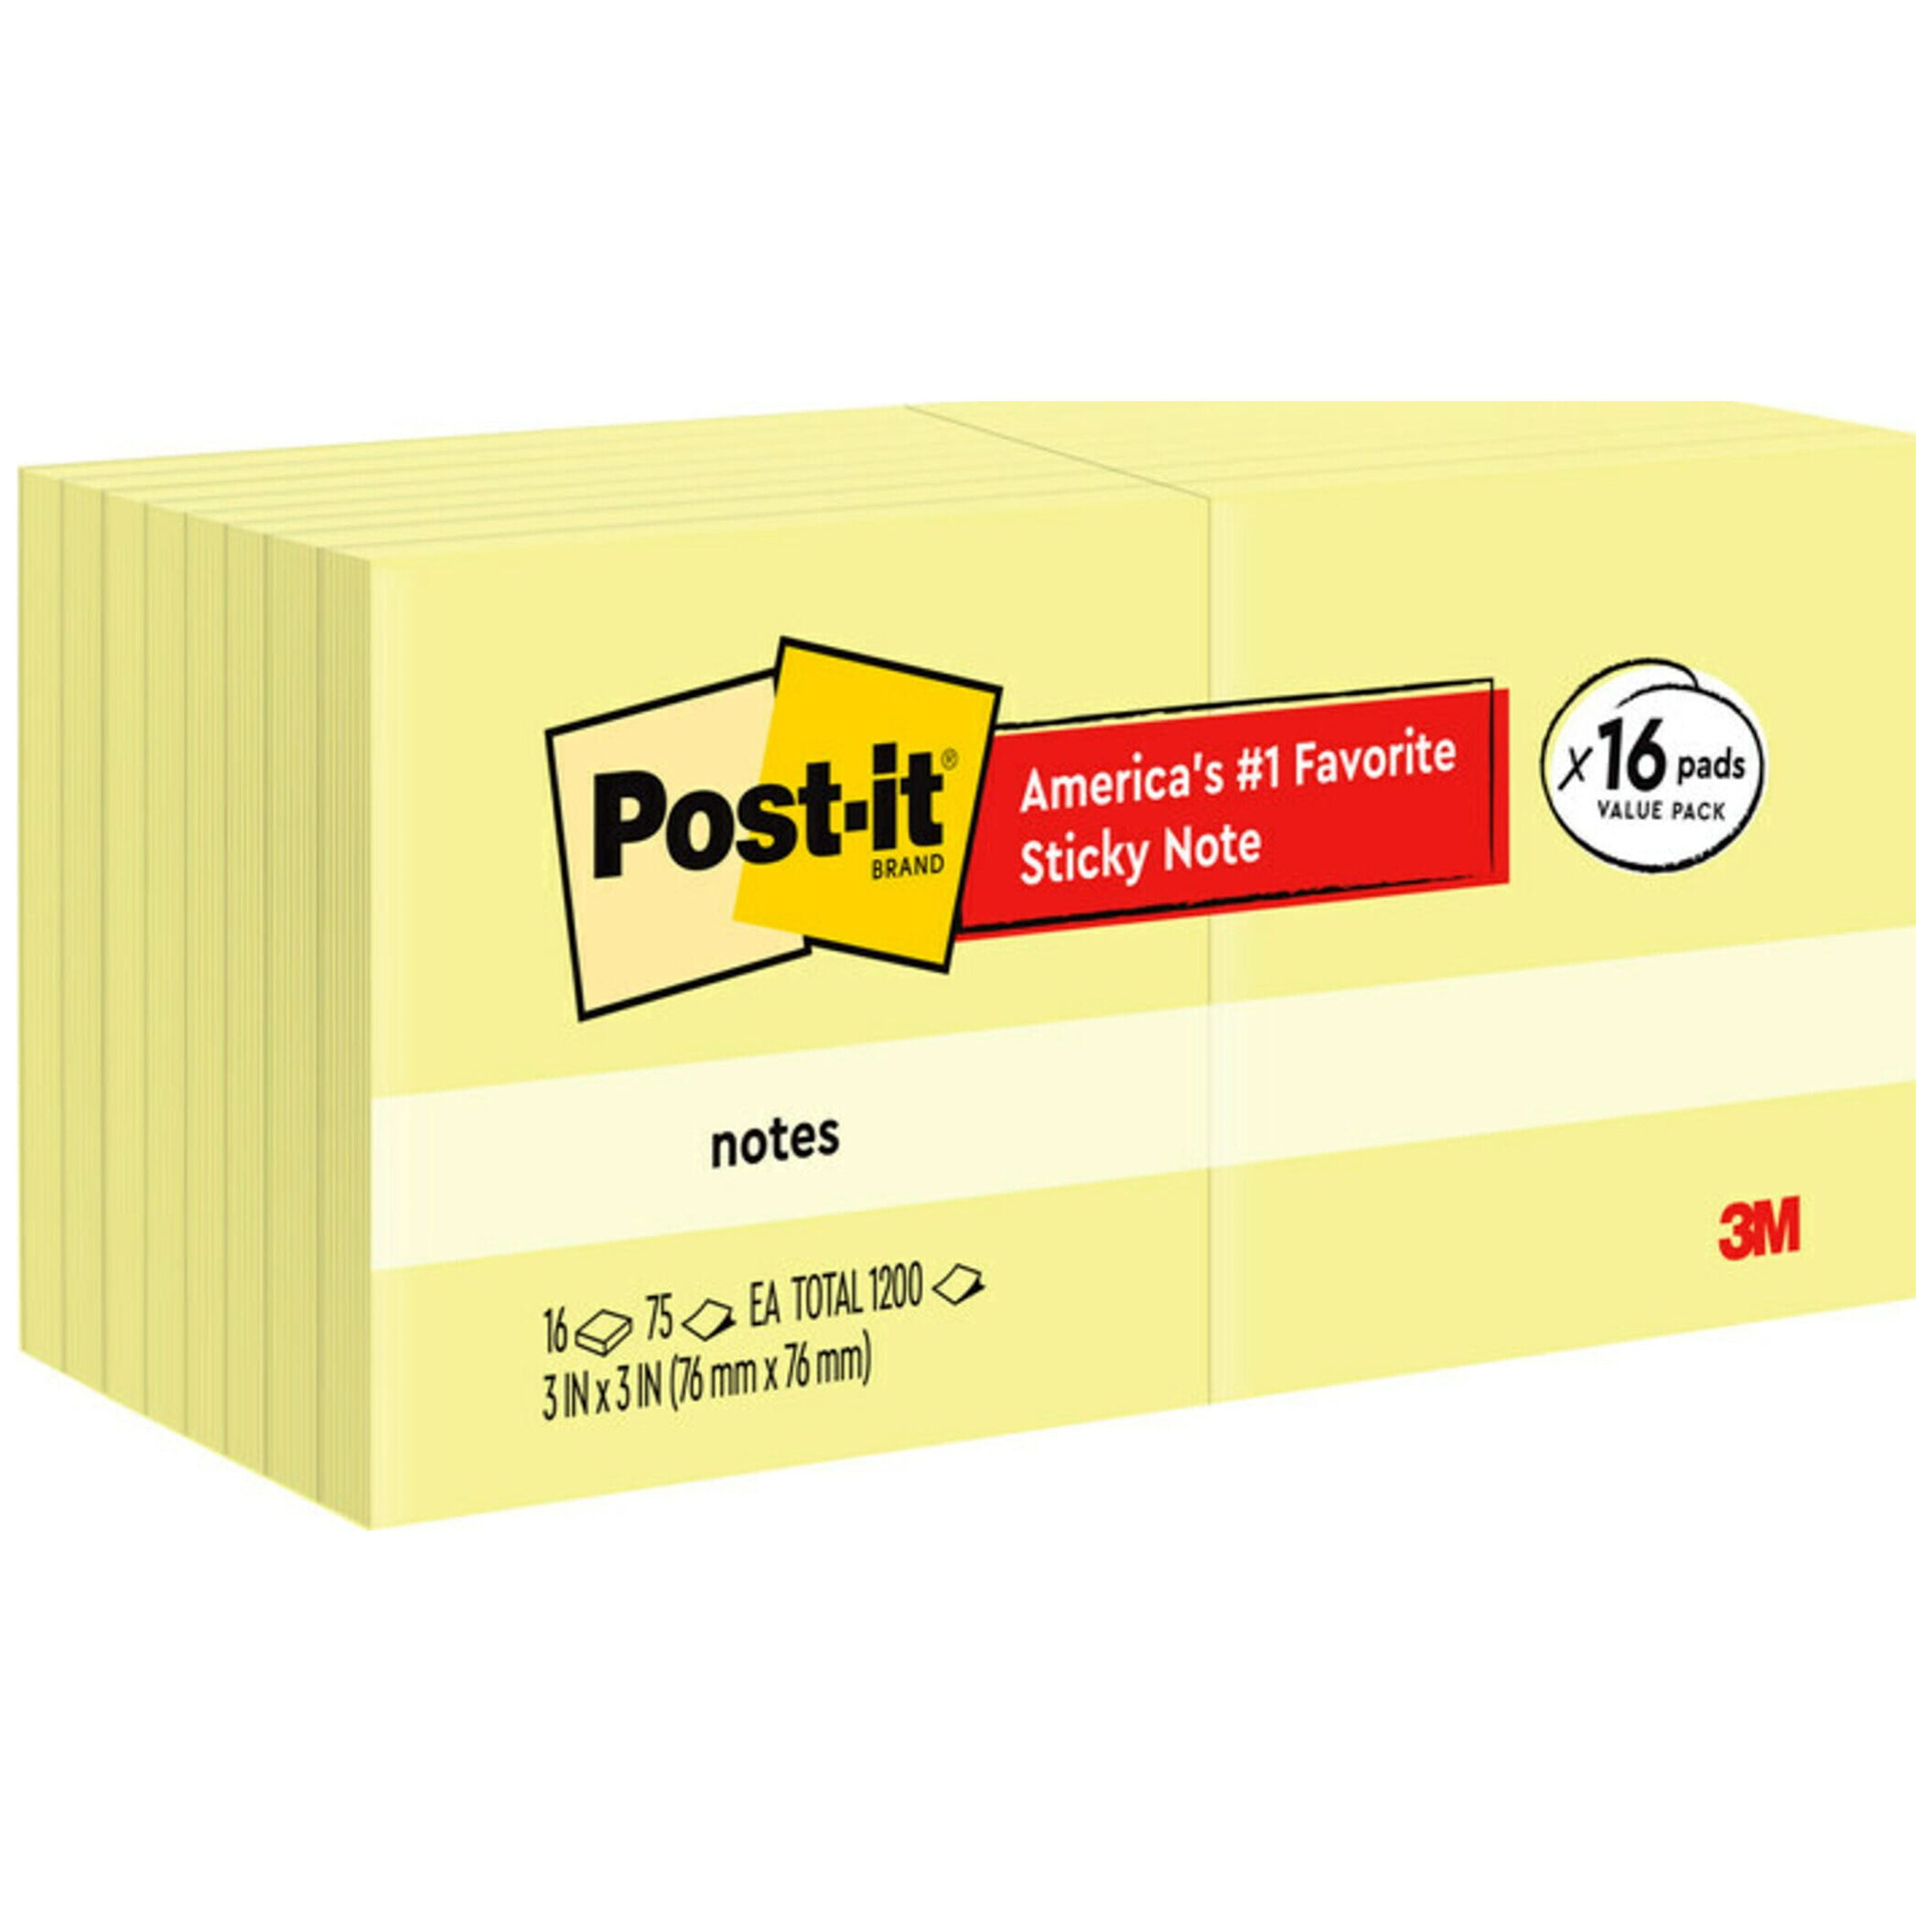 Post it Super Sticky Note Pads, 2 x 2, 90 count - 8 pack